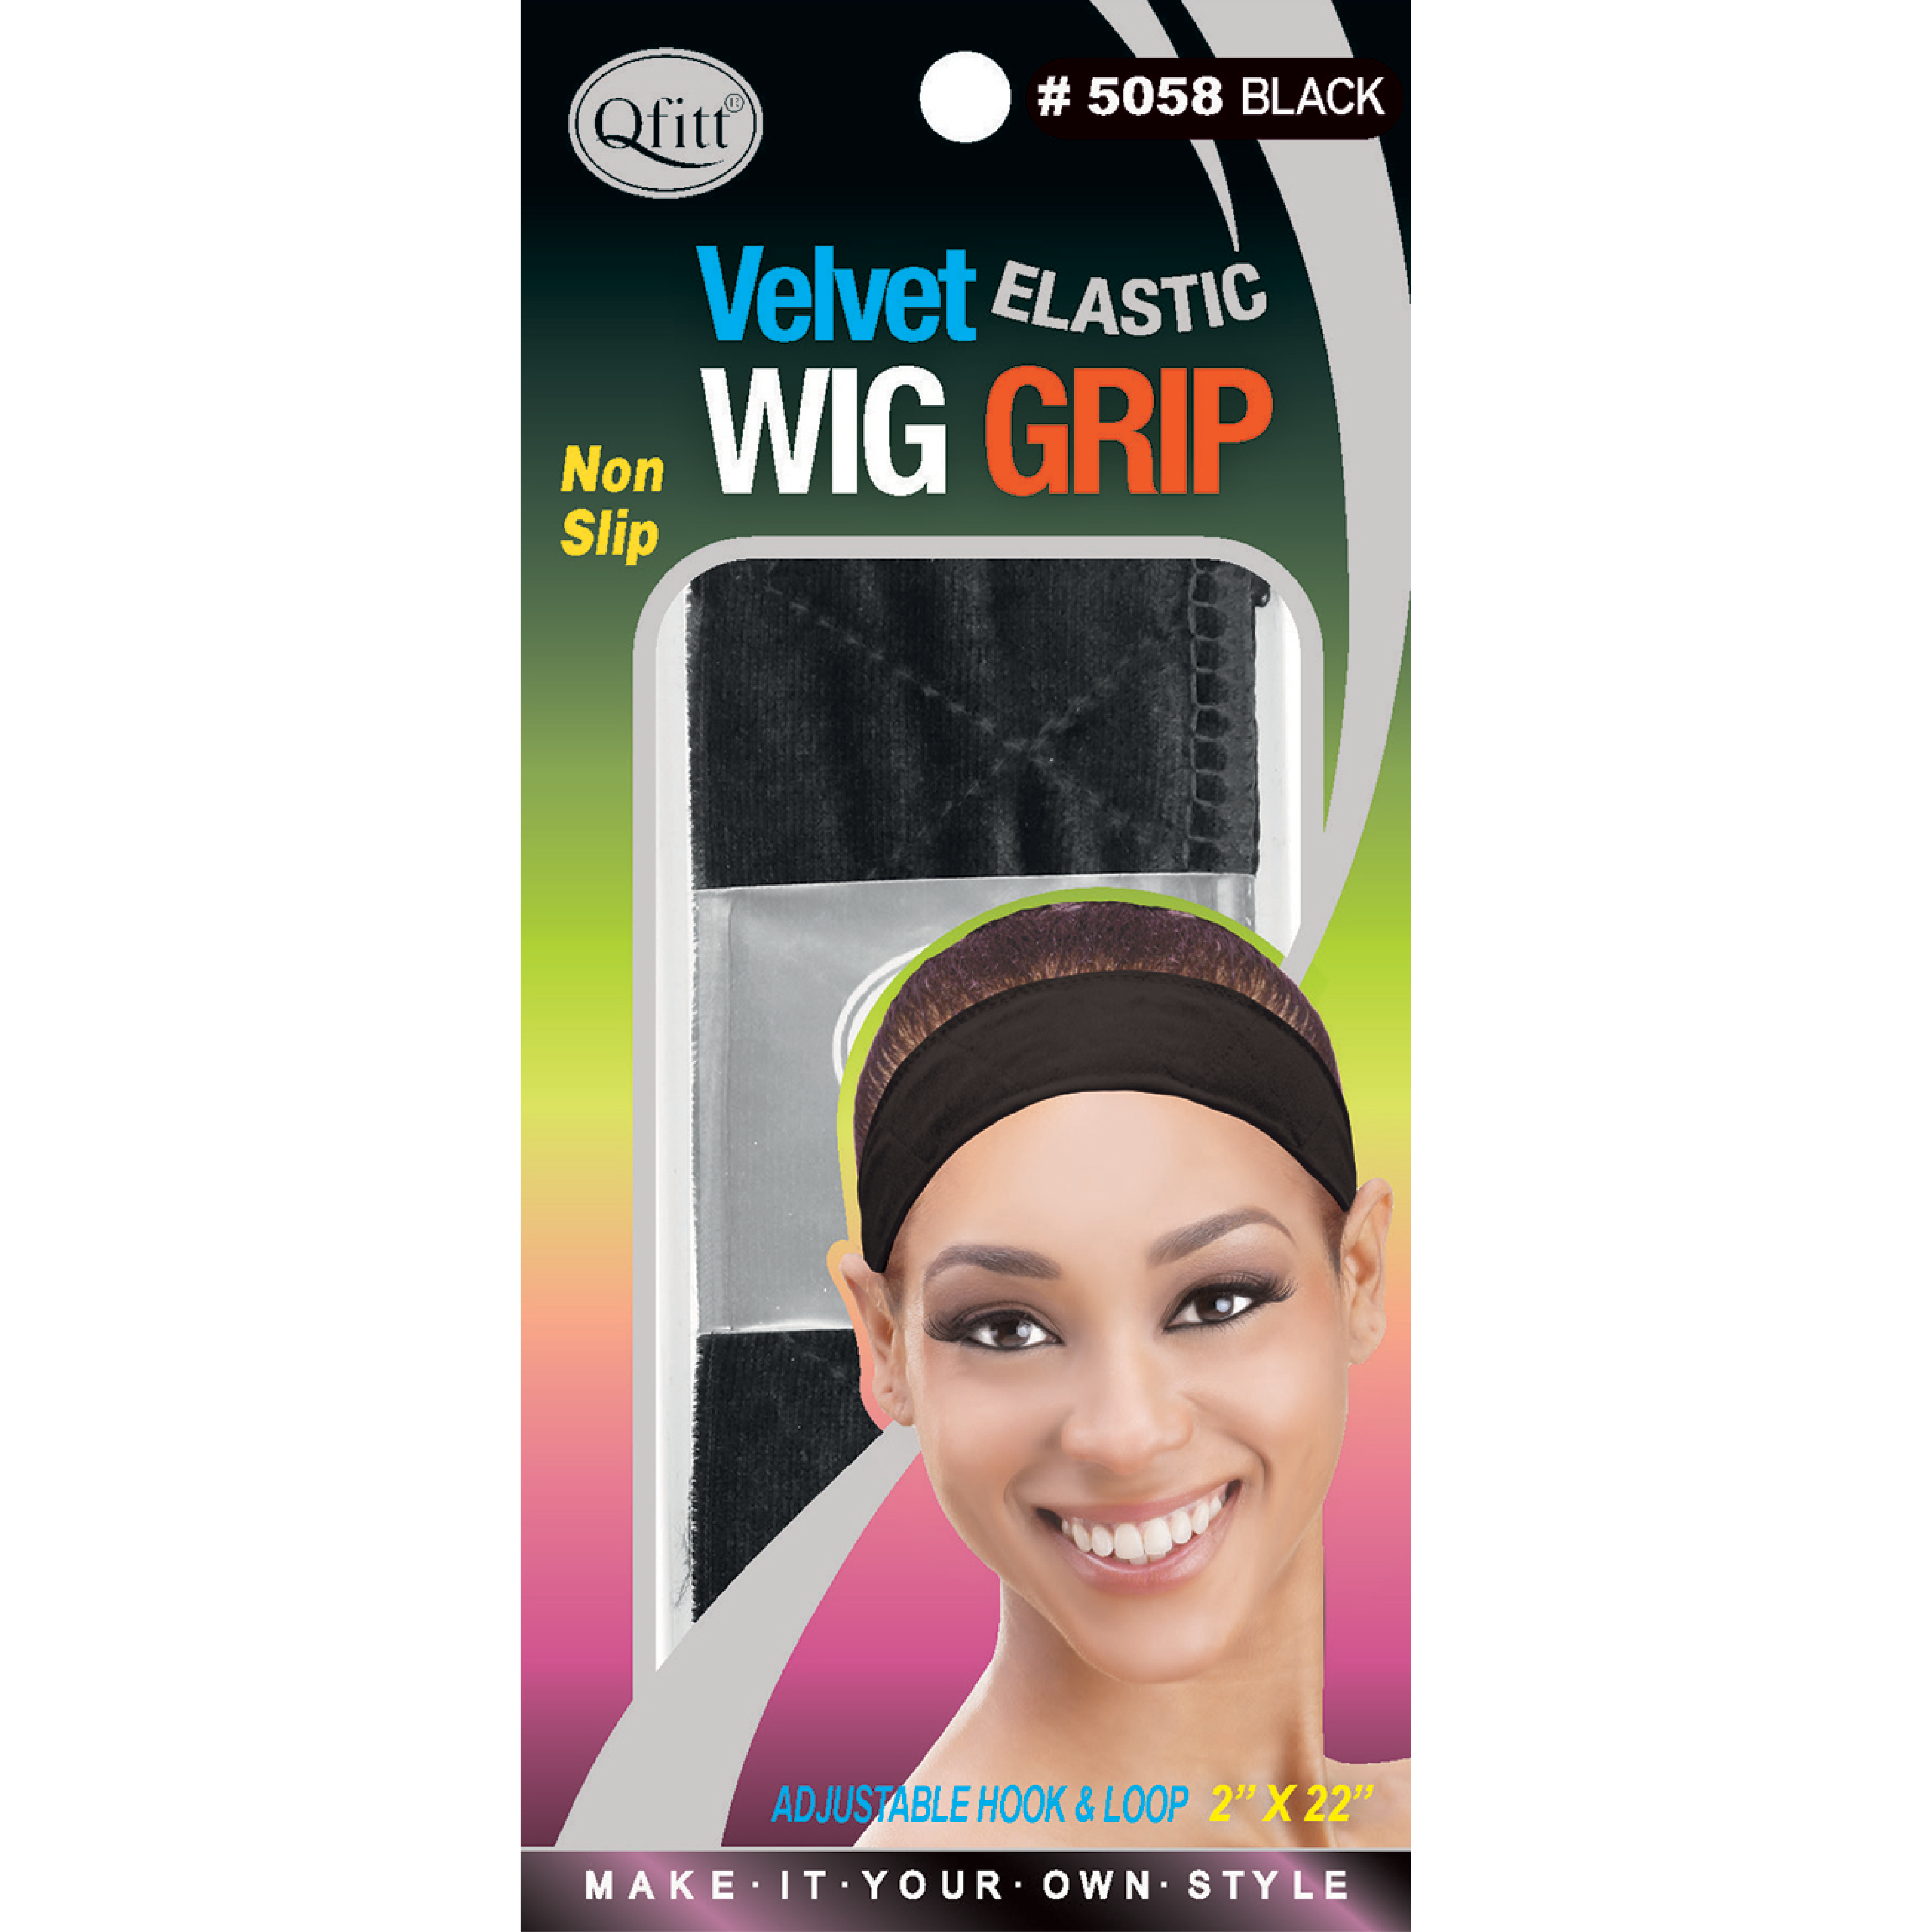 BLISTER LACE COVERED SPRING WIG CLIPS – Qfitt